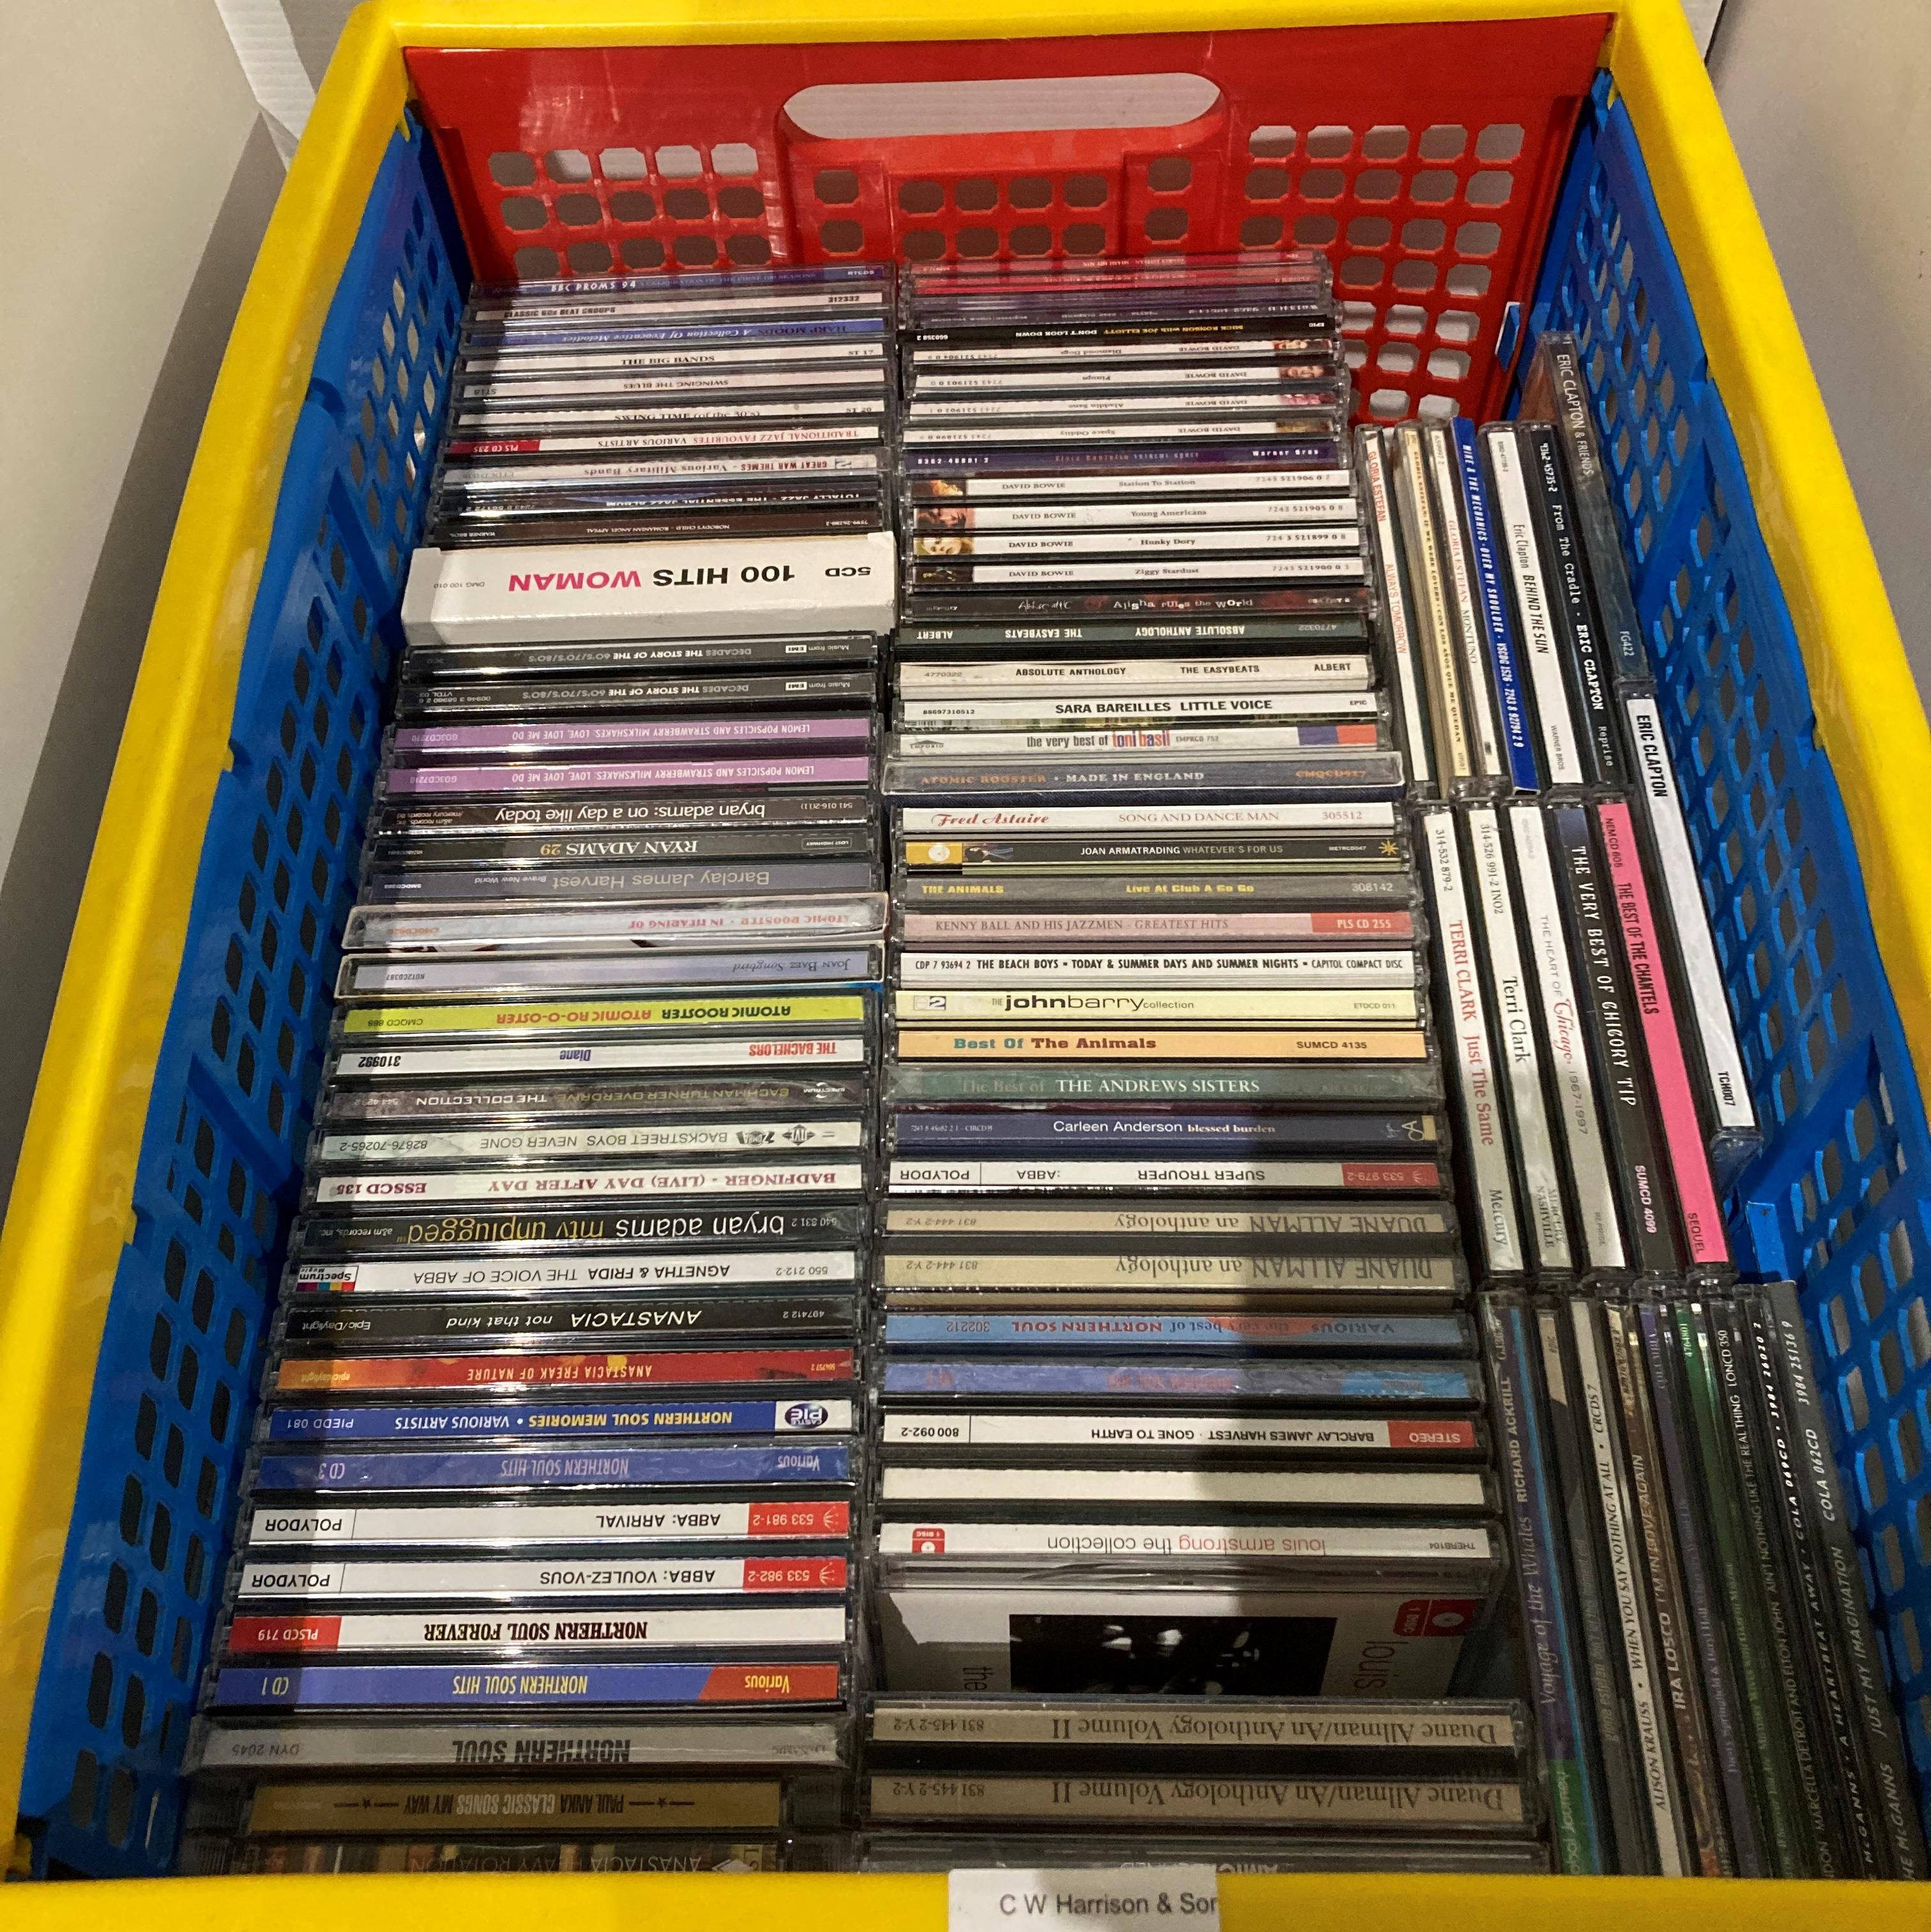 Contents to crate - approximately 100 assorted music CDs including artists - David Bowie, Abba,